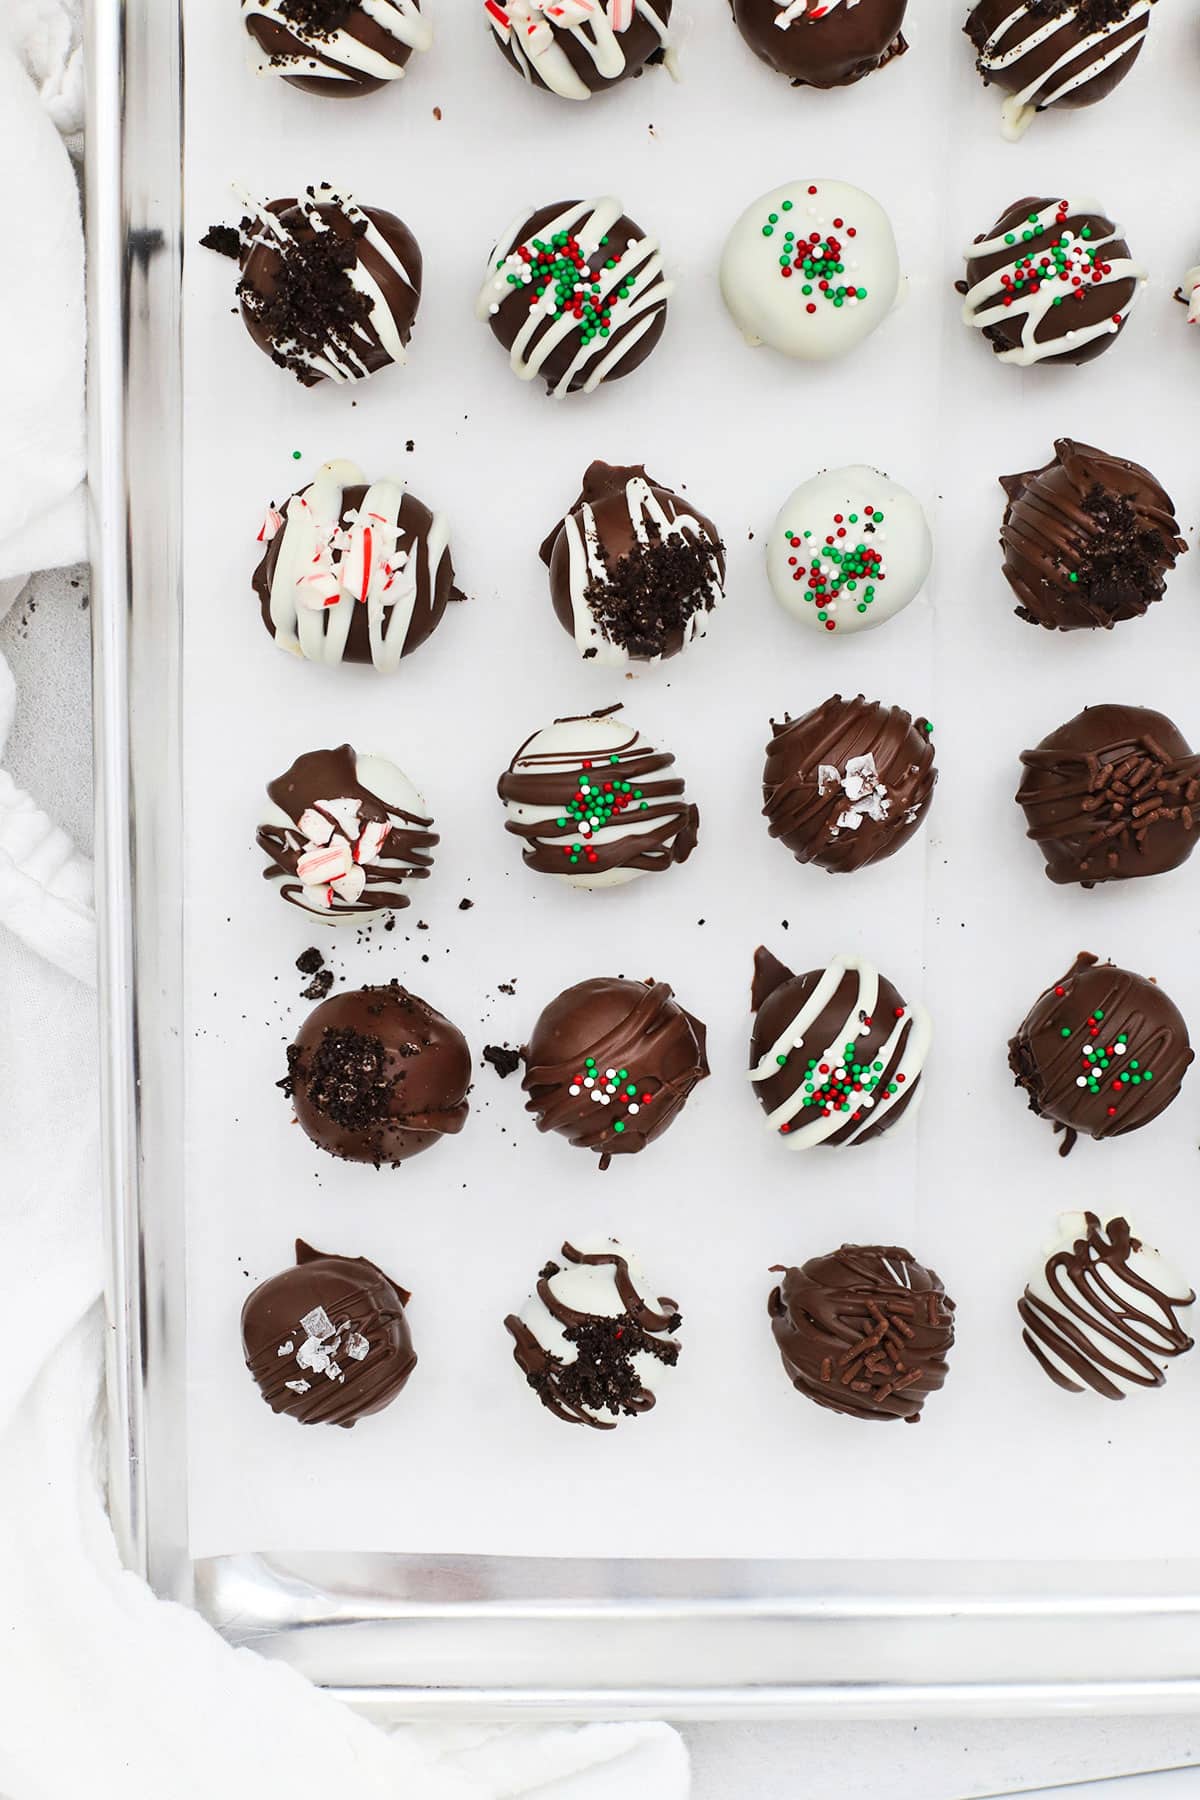 Gluten-free Oreo truffles setting on a baking sheet, topped with different toppings